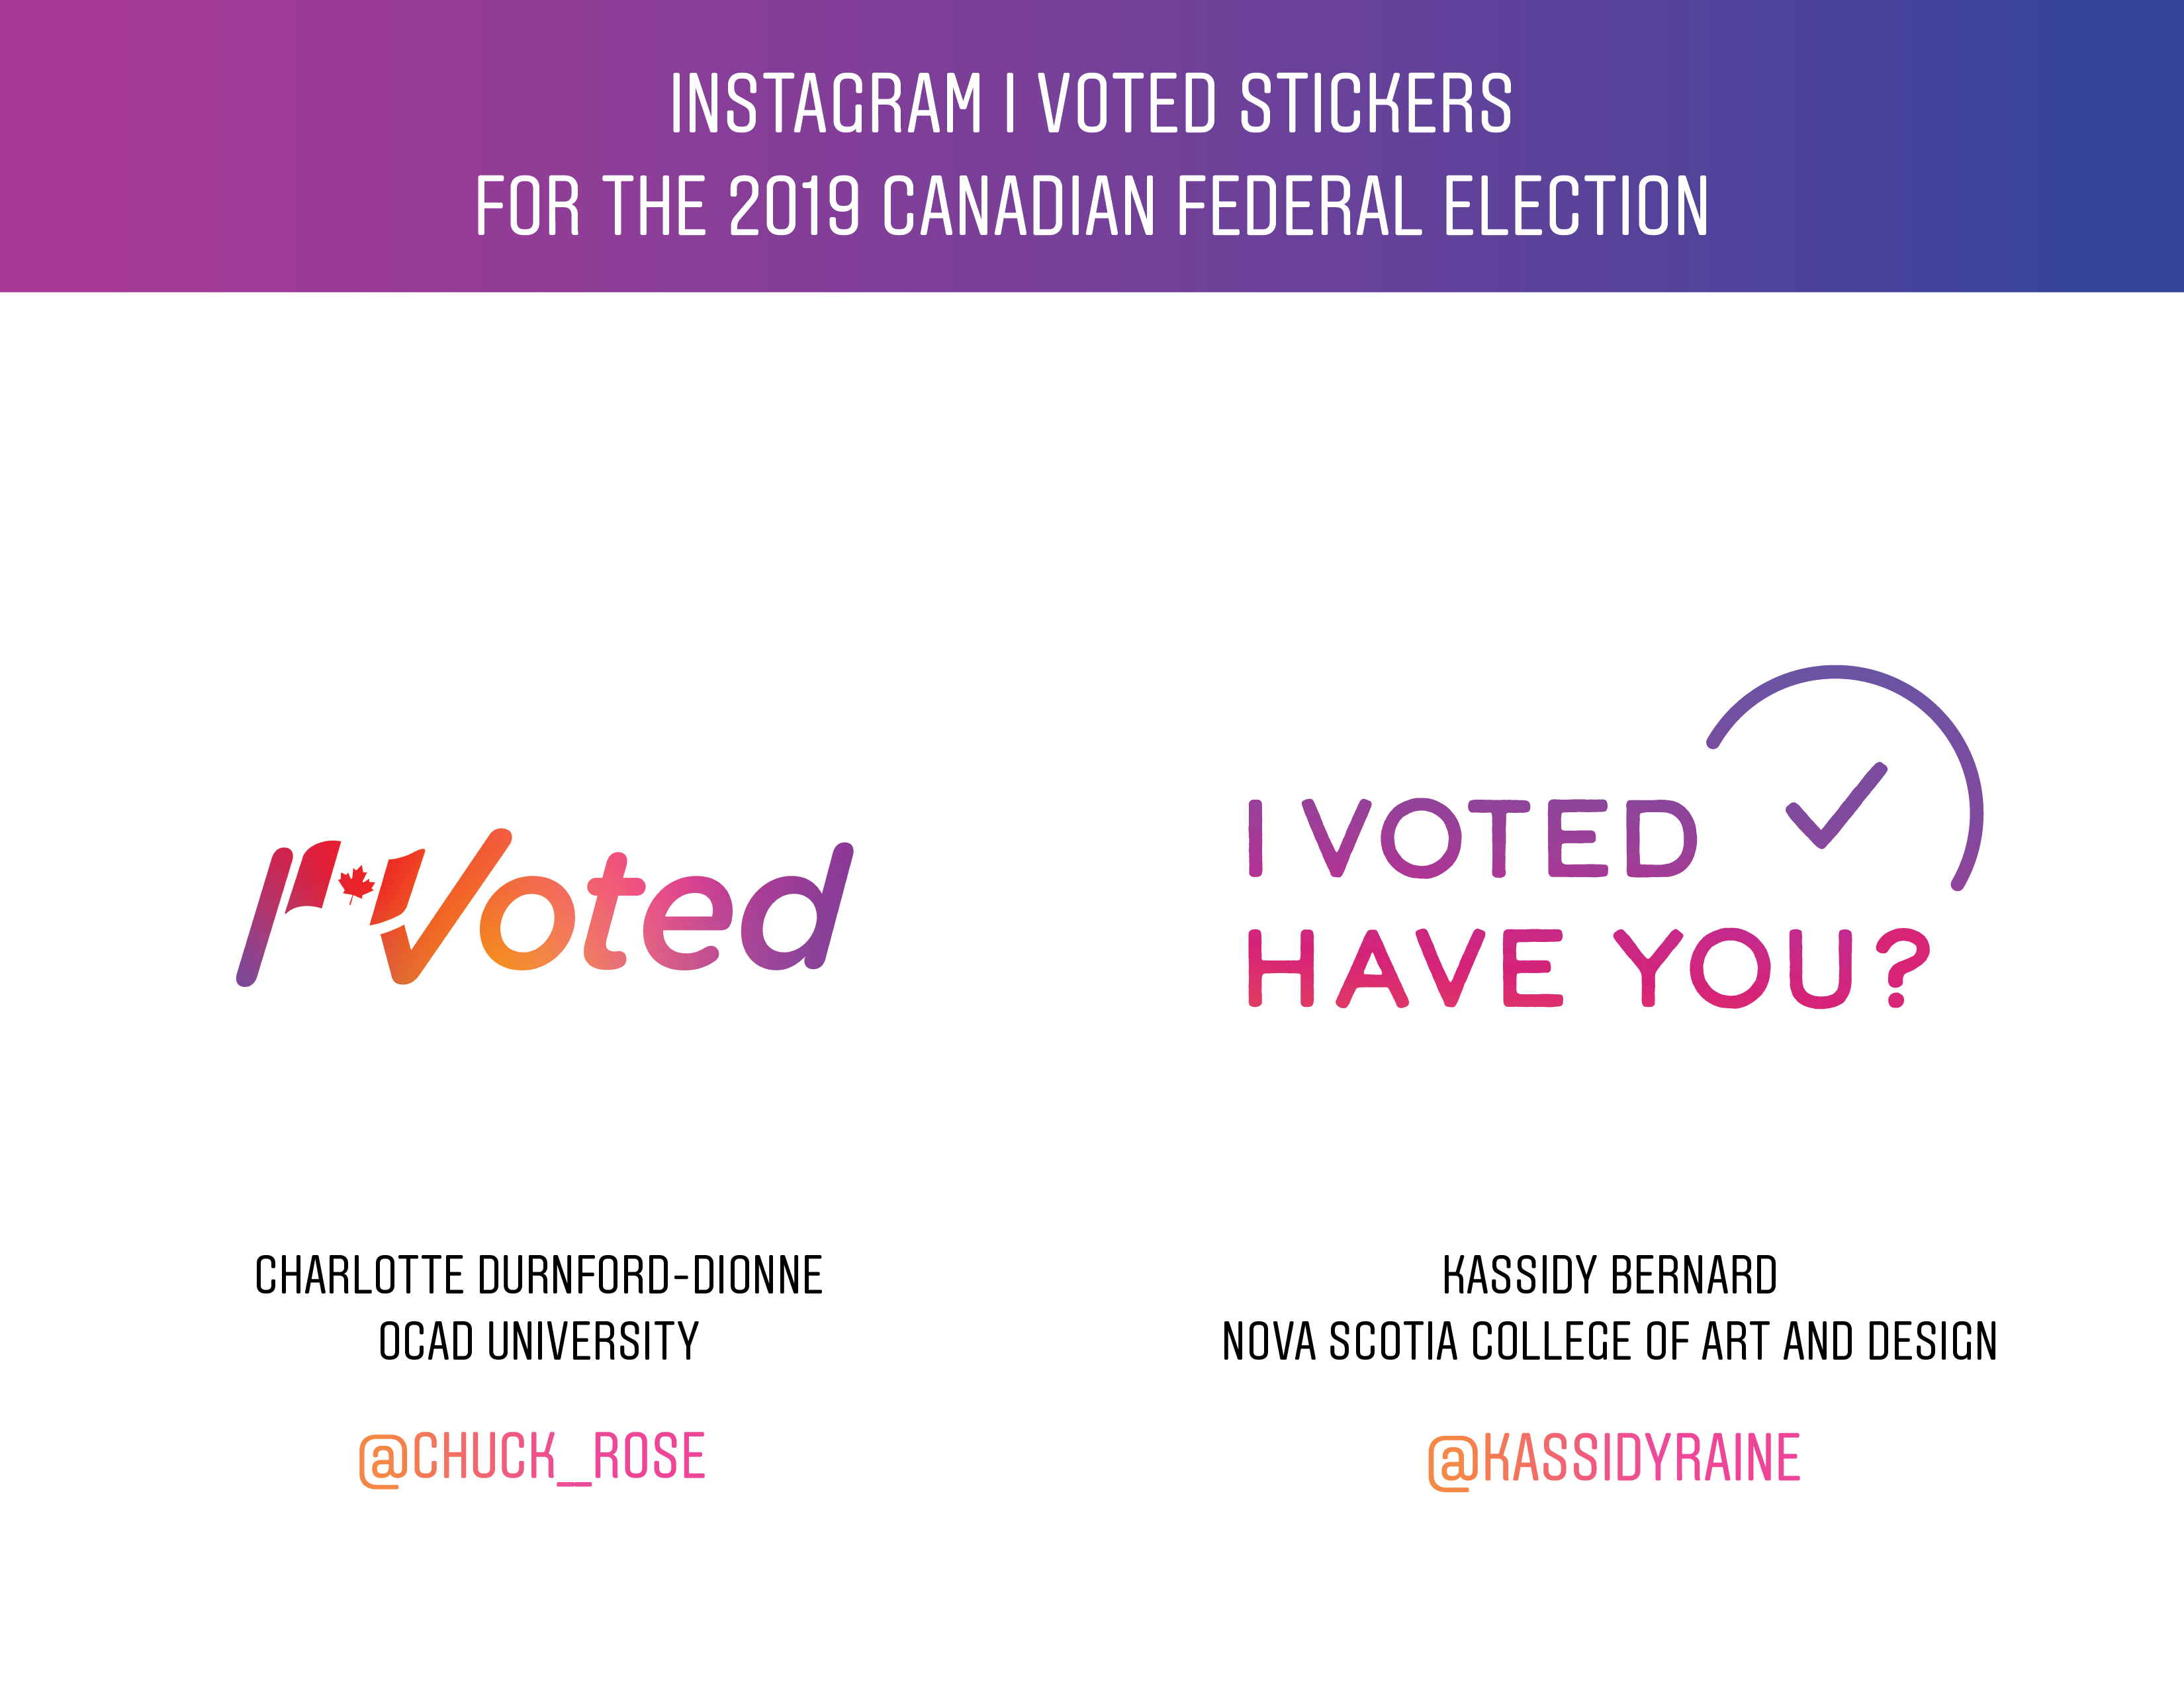 Winning designs in 'I Voted' sticker competition